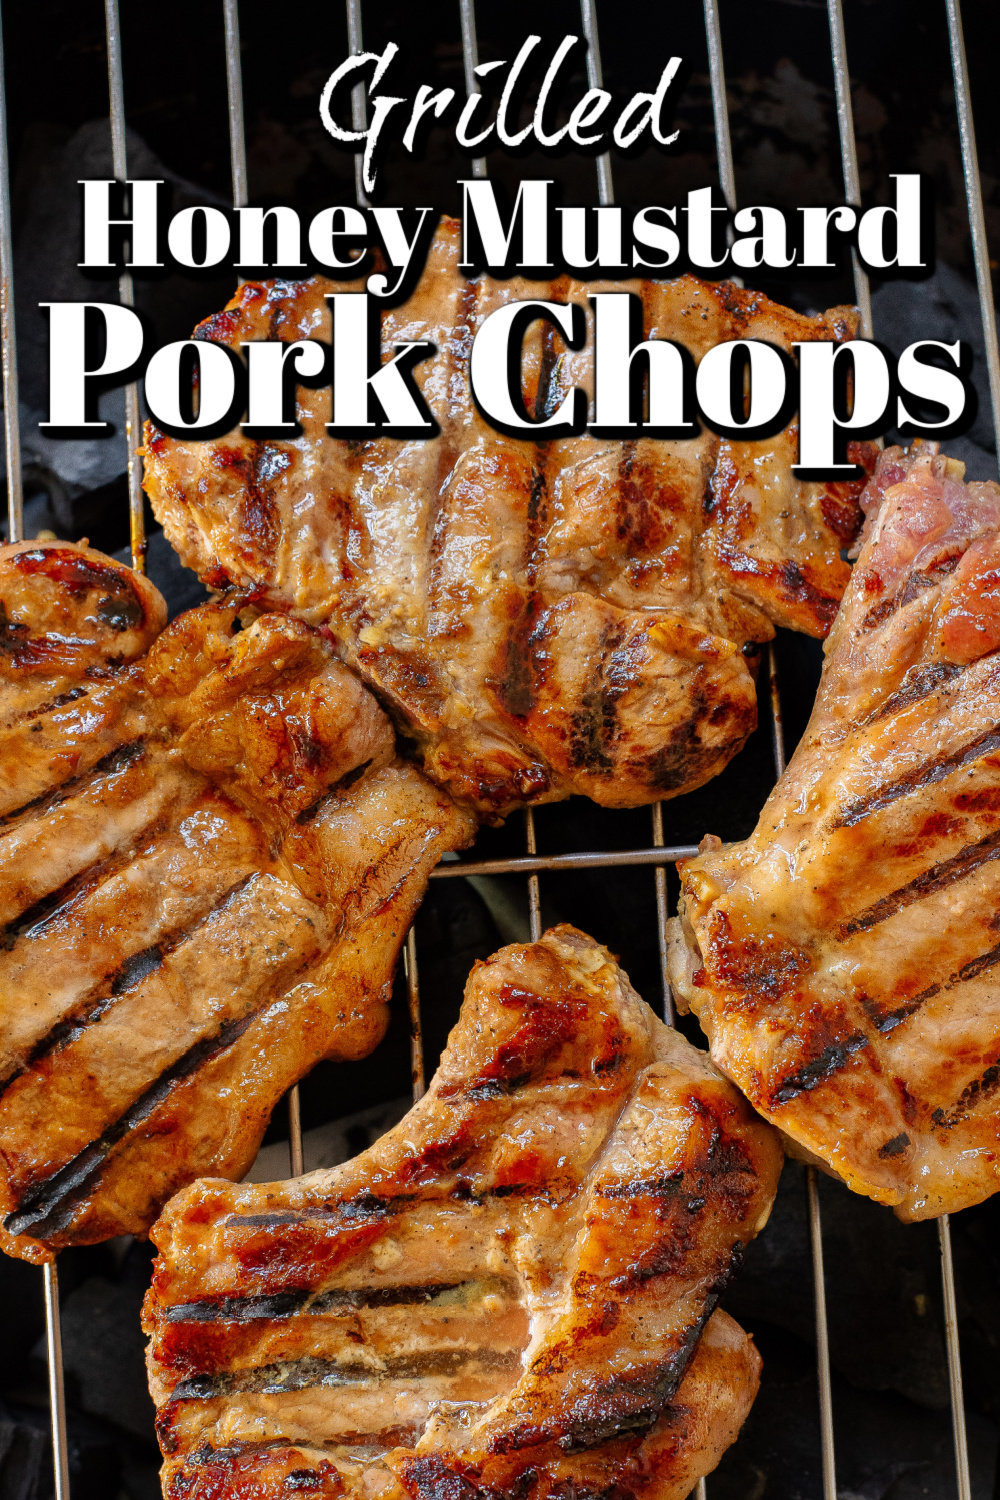 Bump up your grilling game with these Grilled Honey Mustard Pork Chops. They are a little sweet, a little tangy and a whole lot of tasty!